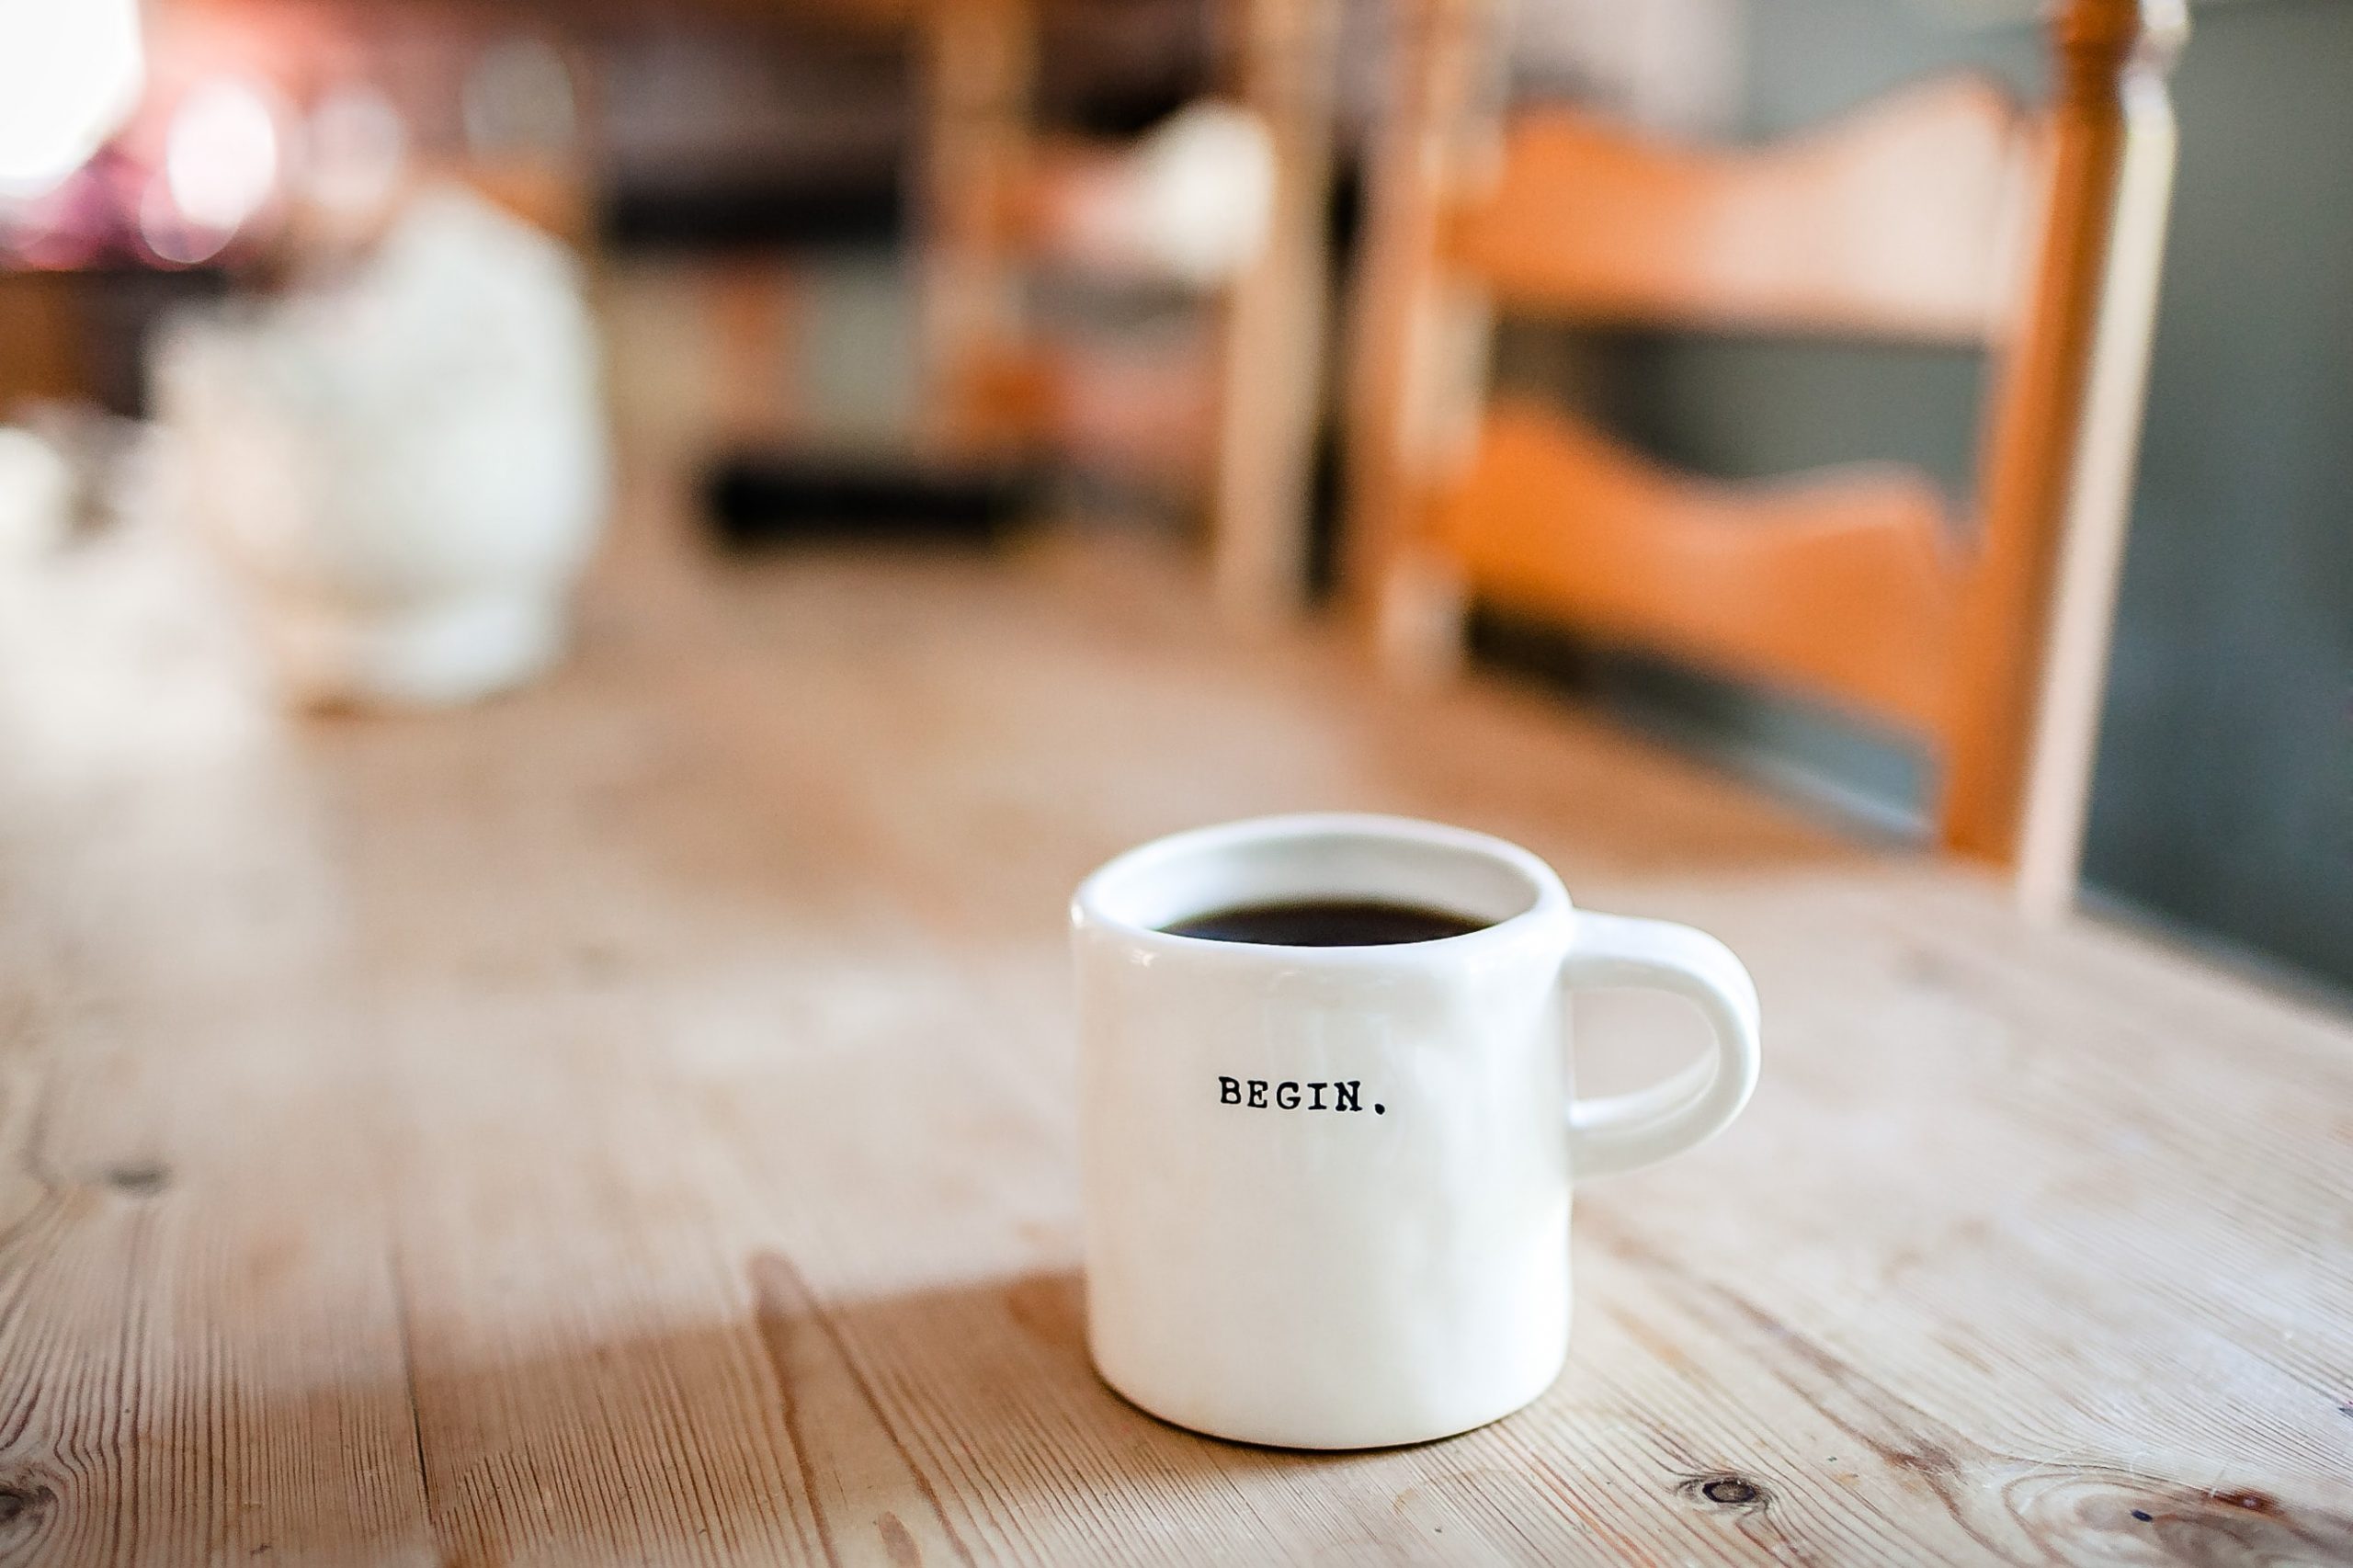 A white ceramic mug engraved with the word "begin" sits on a wooden table.